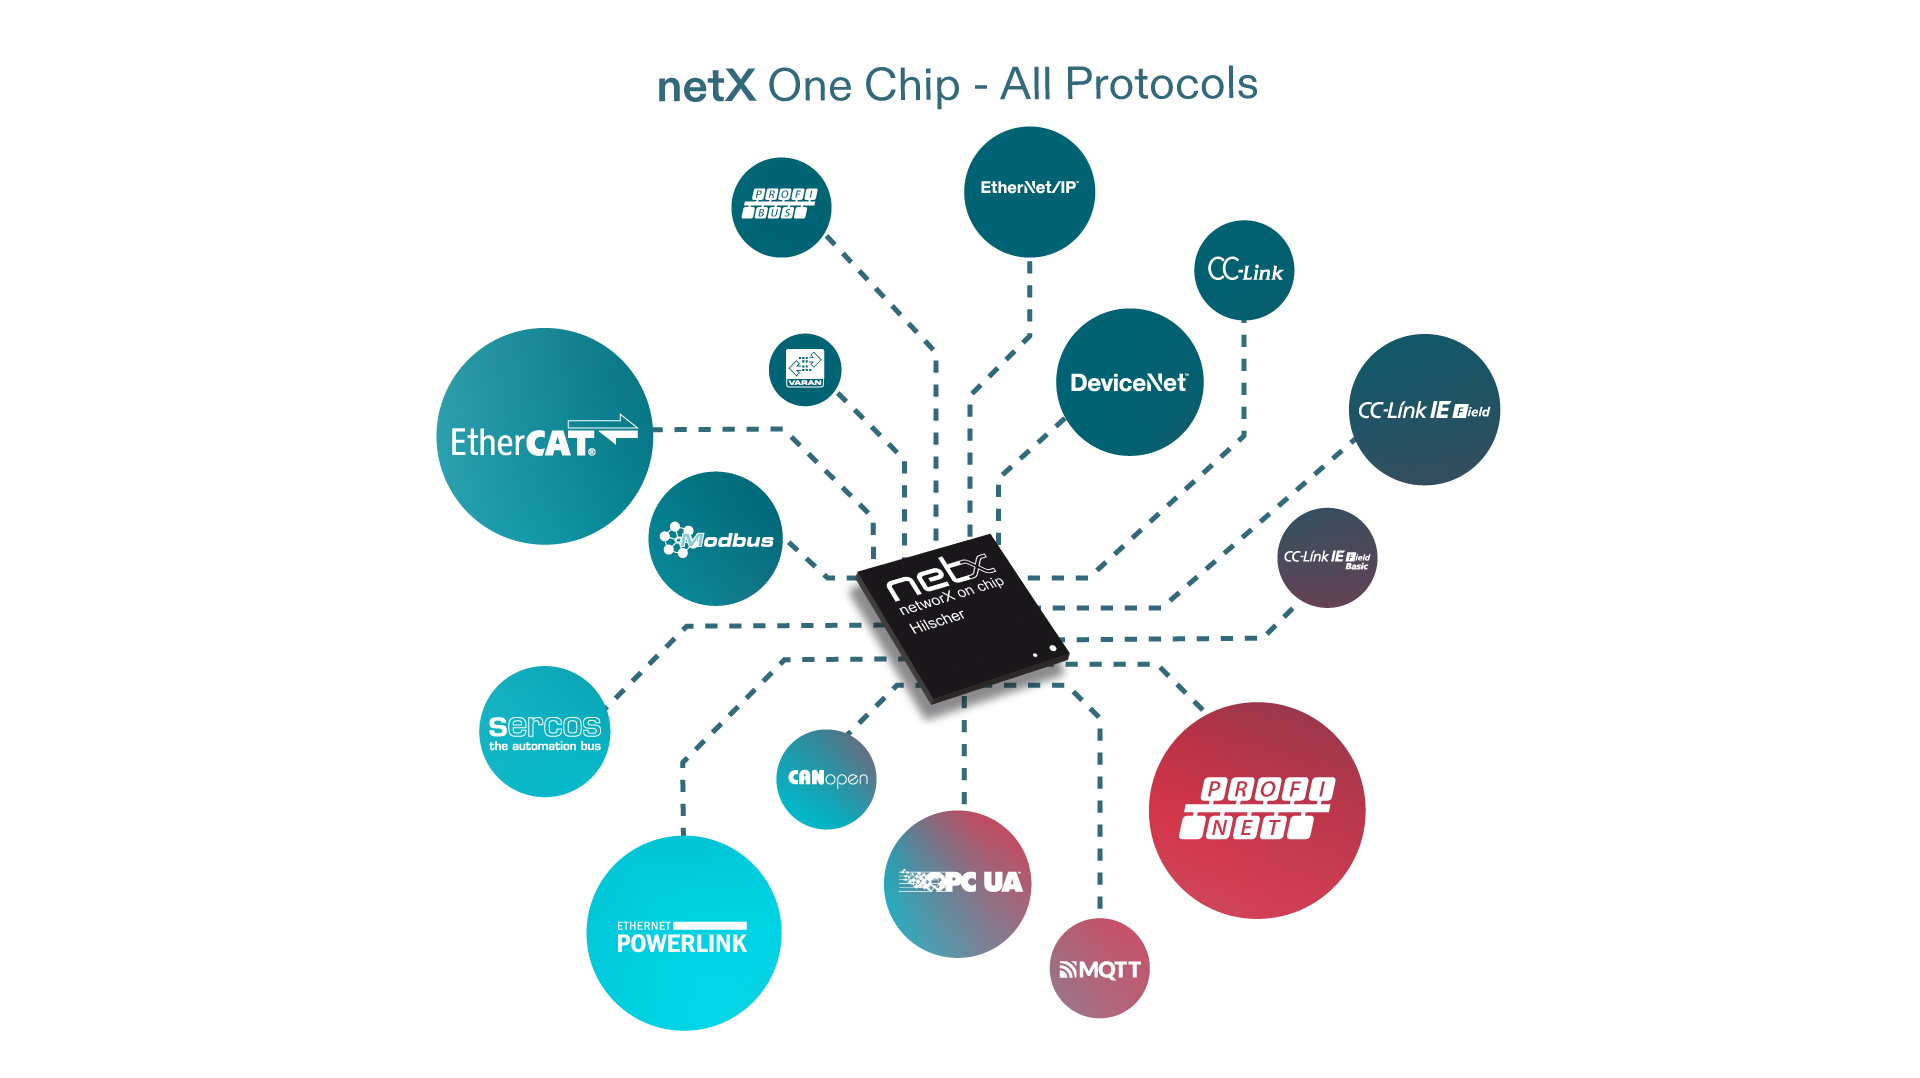 A black netX chip surrounded by logos of various industrial protocols such. The logos are in white and a are placed in colorful bubbles around the chip. Each bubble is connected to the netX chip with dotted lines.